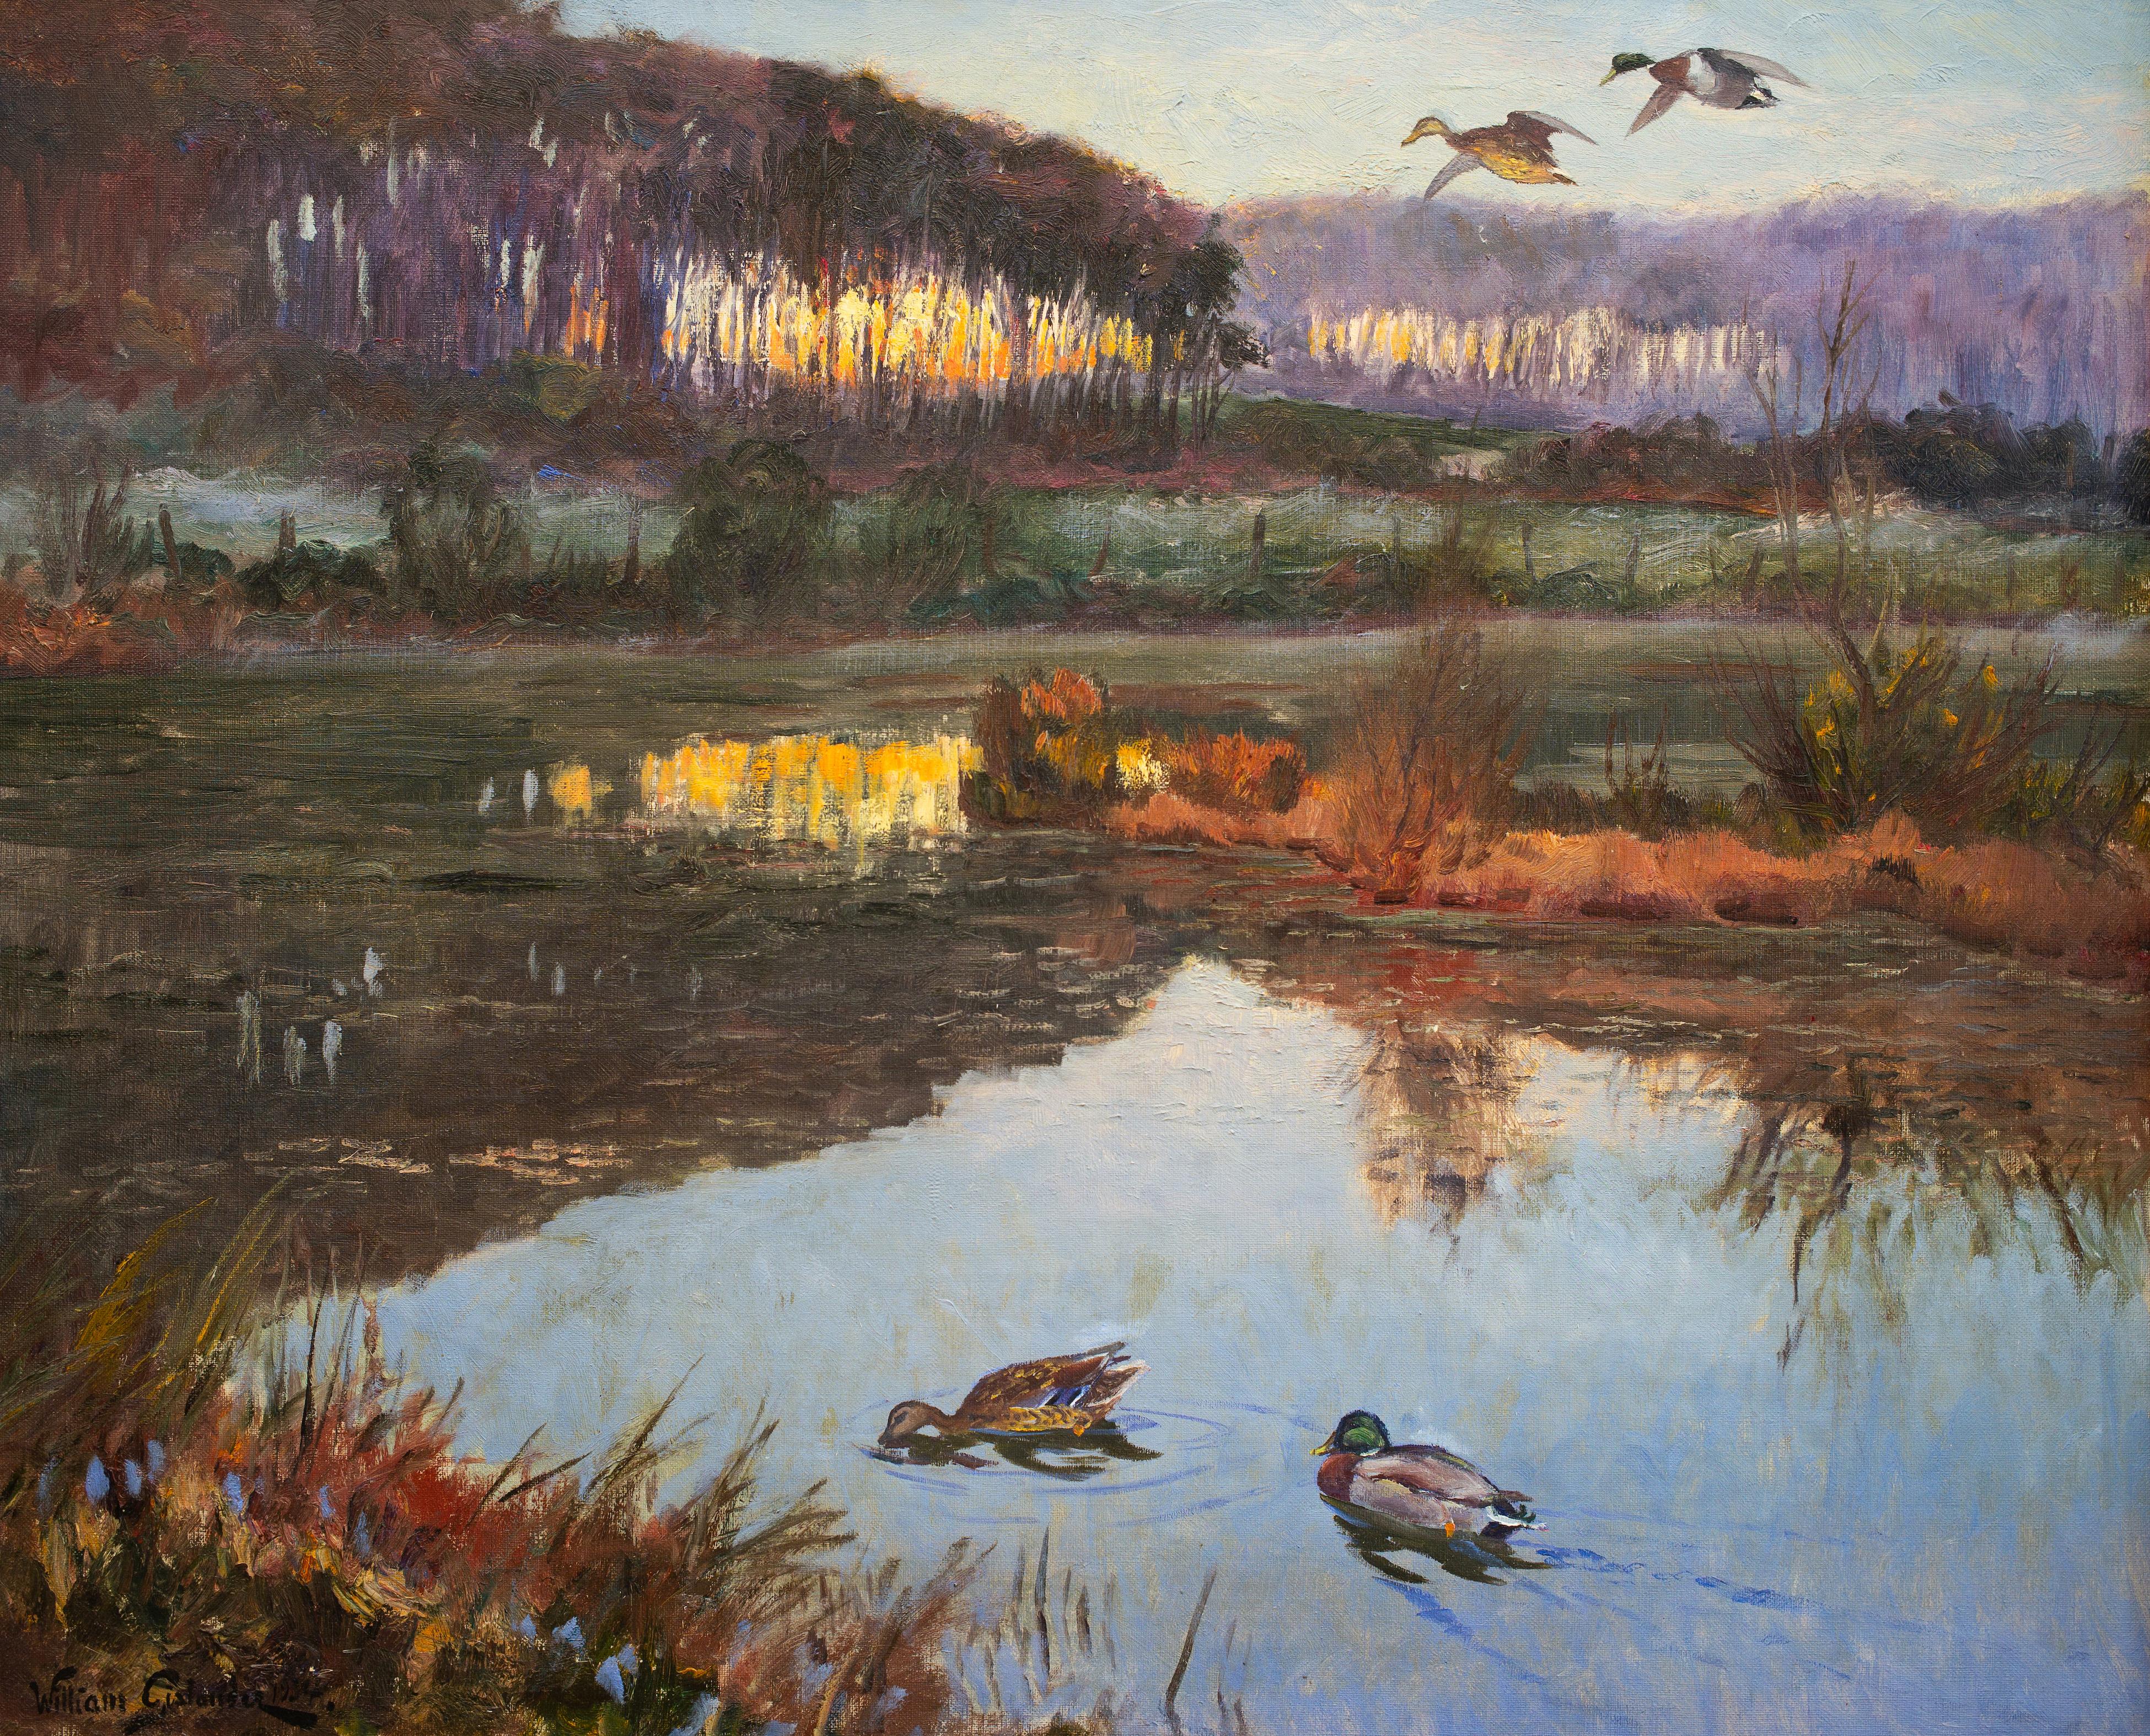 Landscape With Ducks by Swedish Artist William Gislander, Oil Painting on Canvas